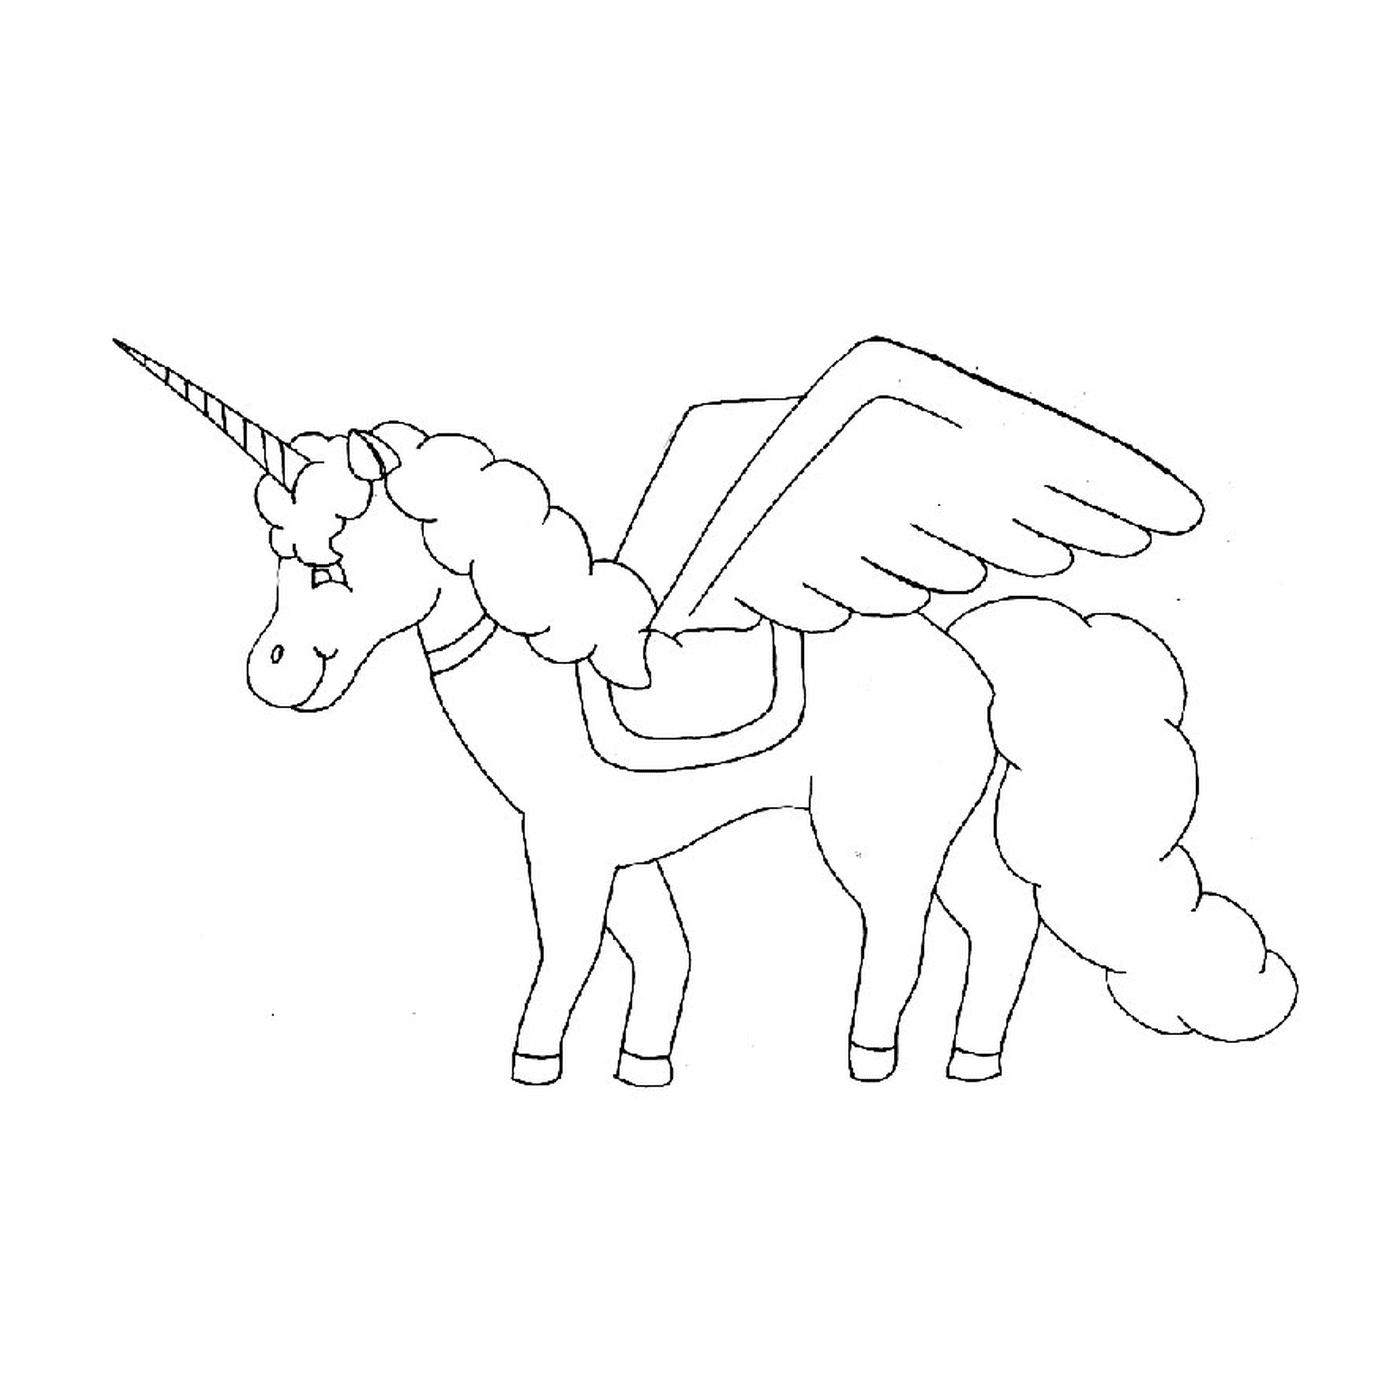  Flying horse - A unicorn with wings 